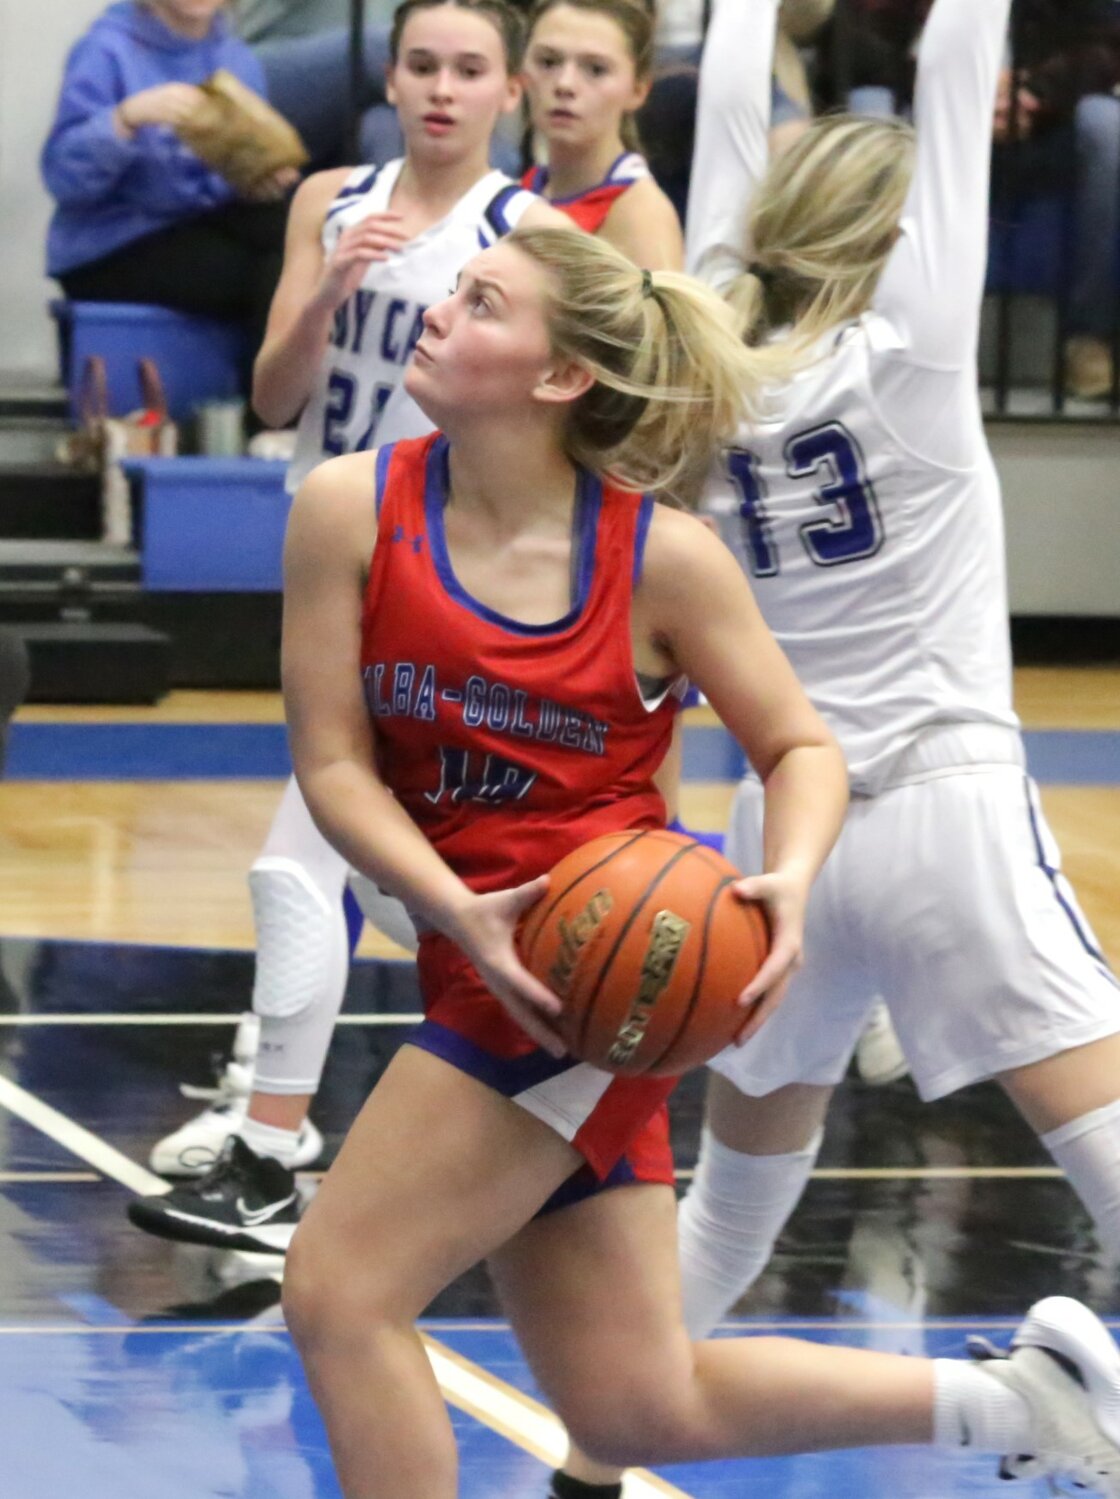 Lady Panther Kayleigh Logan bonds past the opposition on the way to the basket.